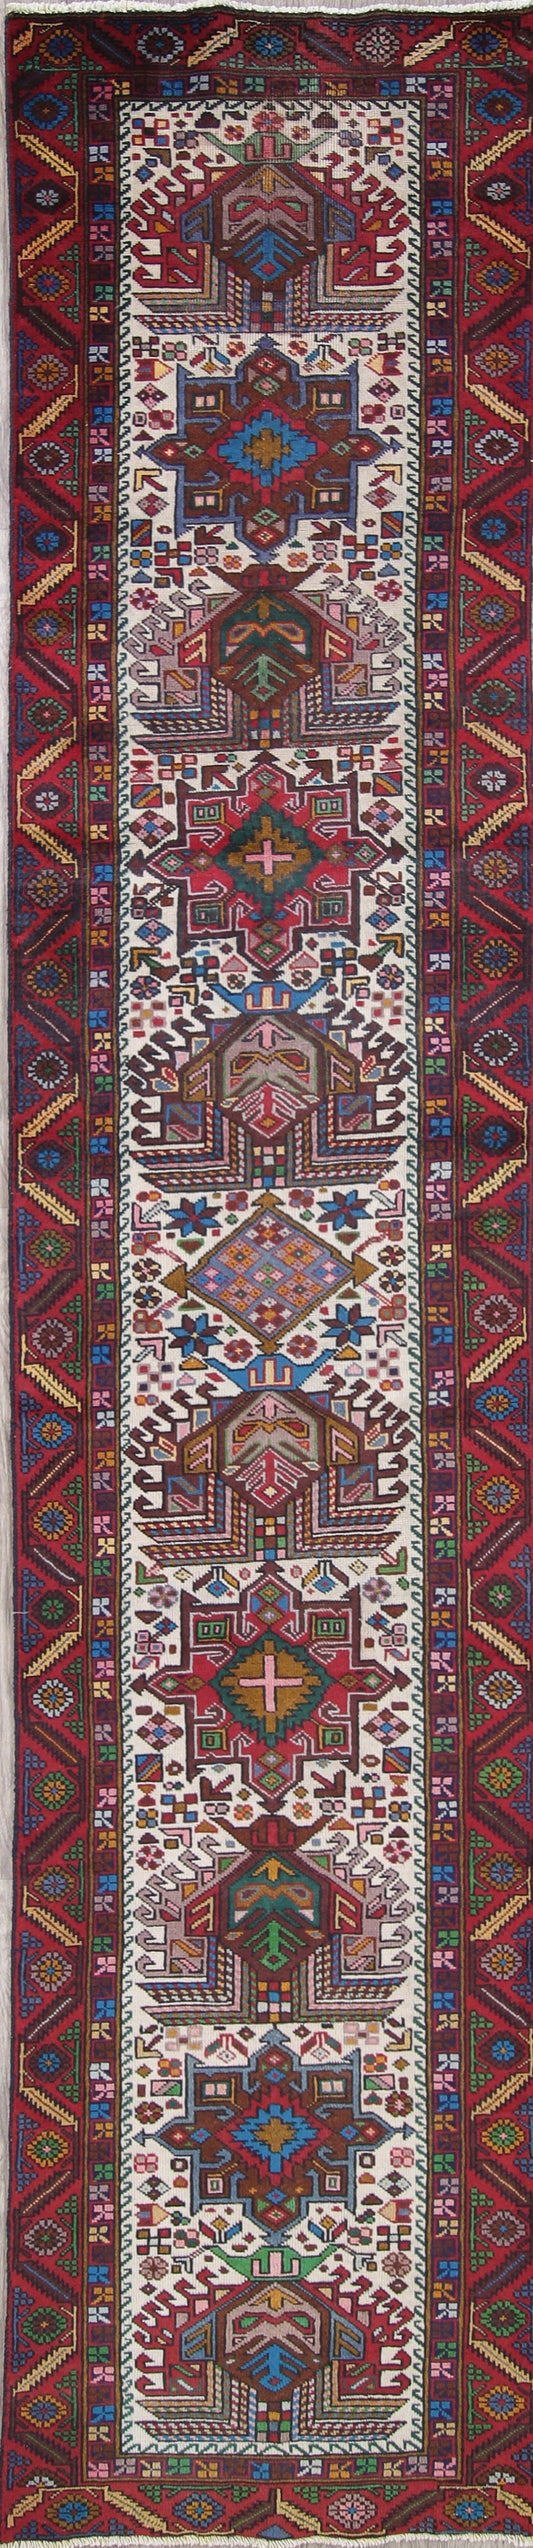 One of a Kind Geometric Heriz Persian Hand-Knotted 3x13 Wool Runner Rug